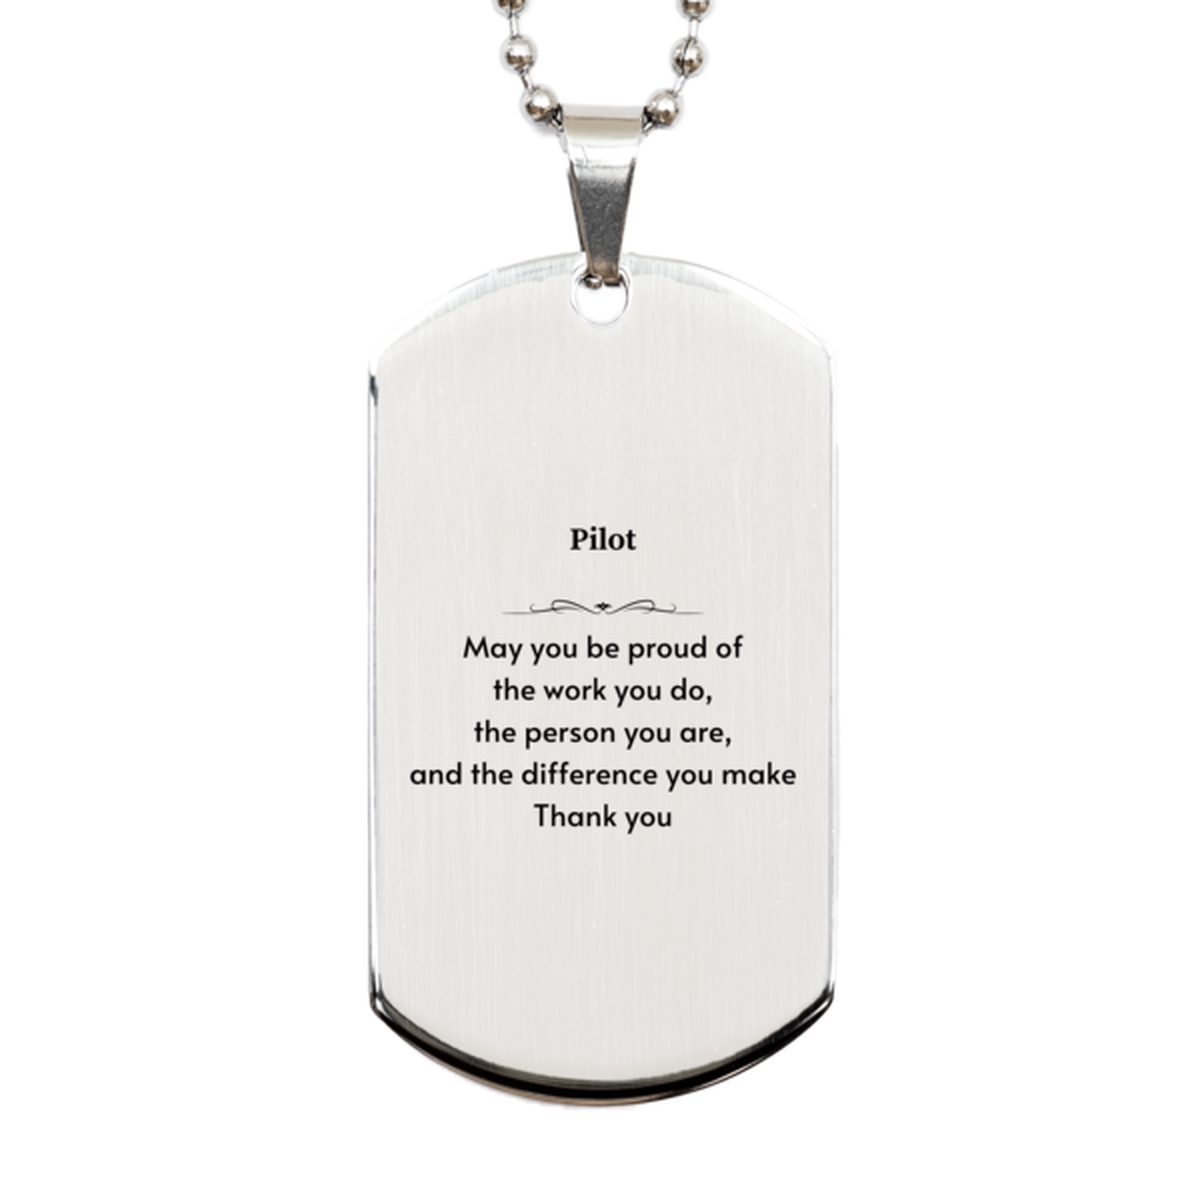 Heartwarming Silver Dog Tag Retirement Coworkers Gifts for Pilot, Pilot May You be proud of the work you do, the person you are Gifts for Boss Men Women Friends